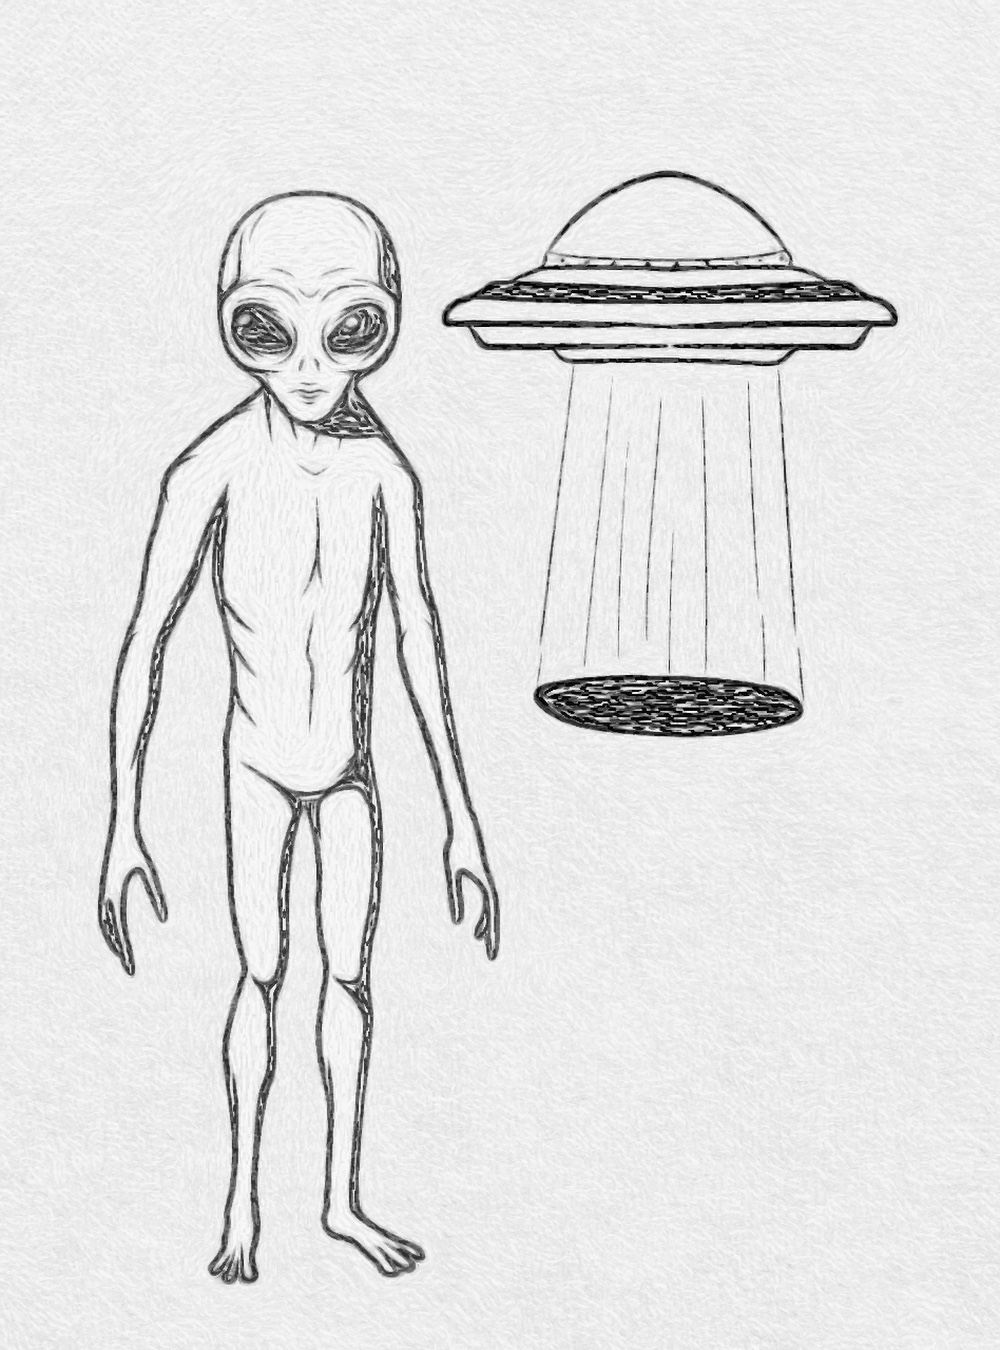 SIMPLE DRAWING OF AN ALIEN AND A SPACESHIP